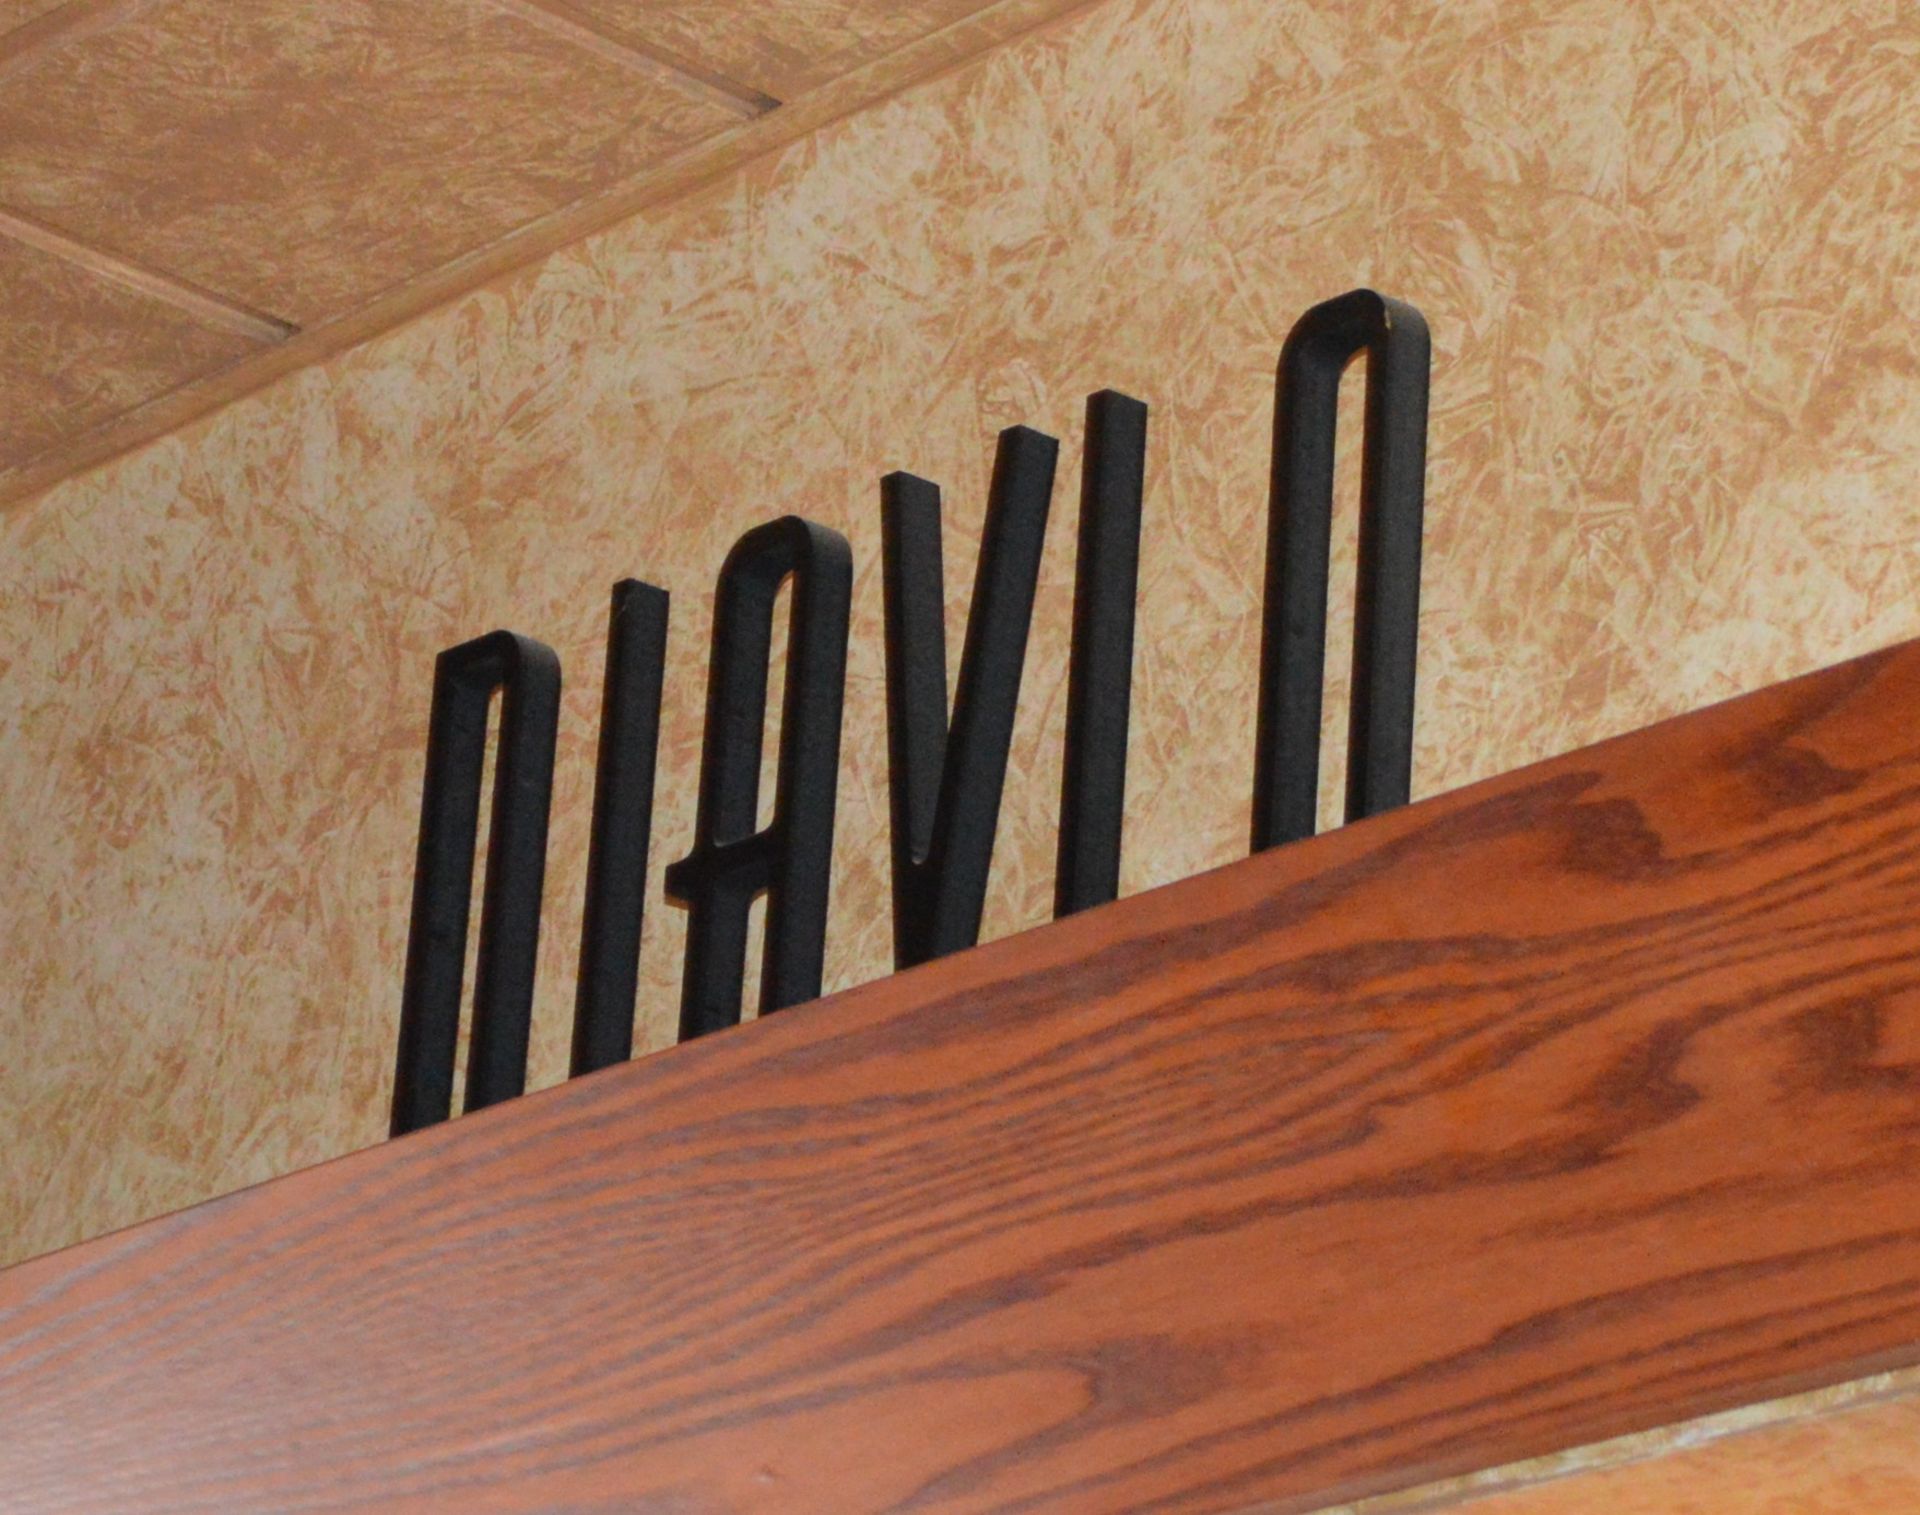 7 x Wooden Signs Suitable For Restaurants, Cafes, Bistros etc - Includes Ceasers Salad, Diavlo, - Image 8 of 9